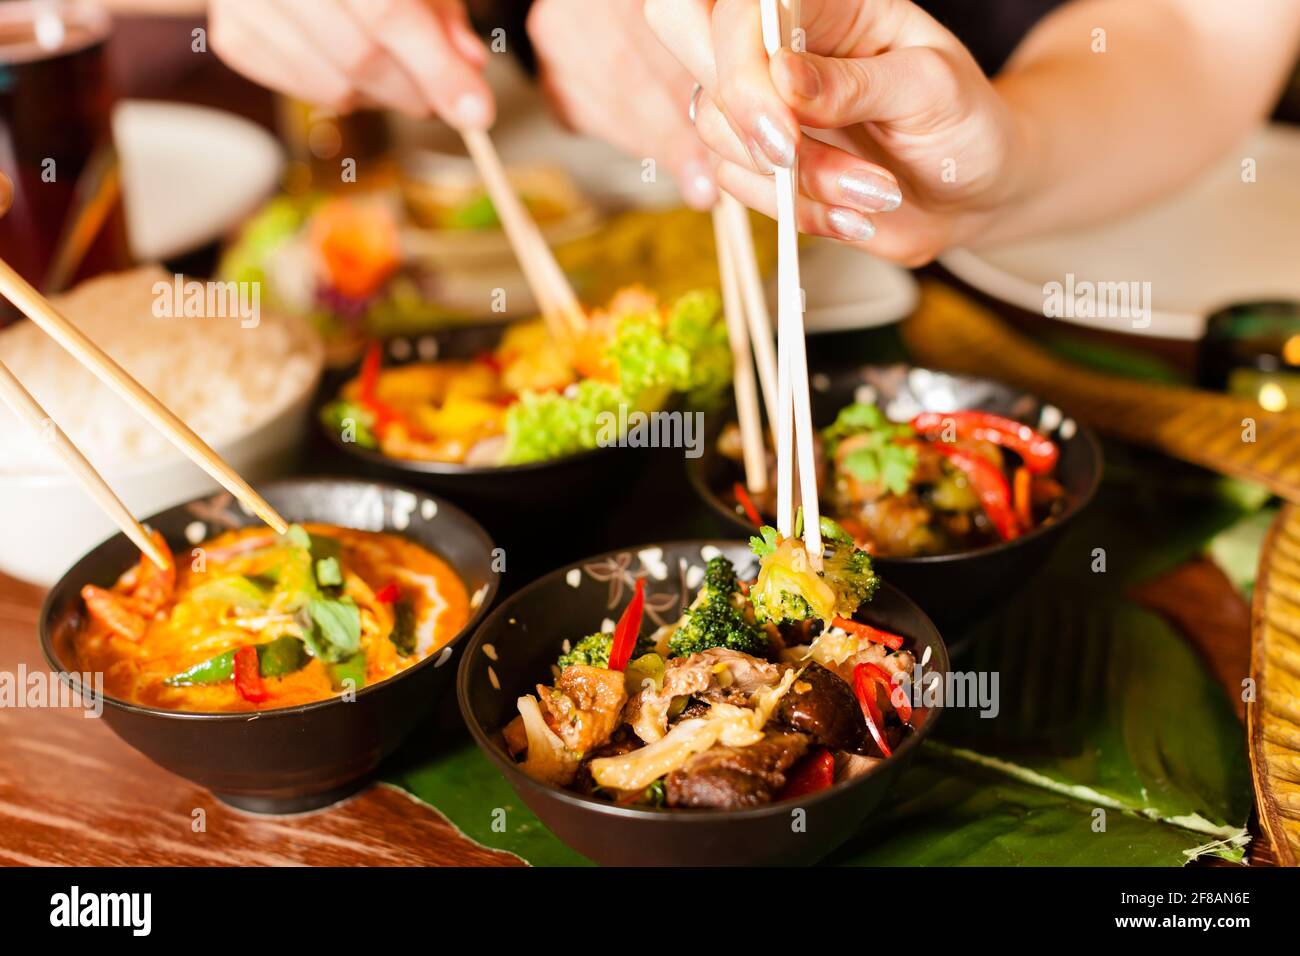 Young people eating in a Thai restaurant, they eating with chopsticks, close-up on hands and food Stock Photo